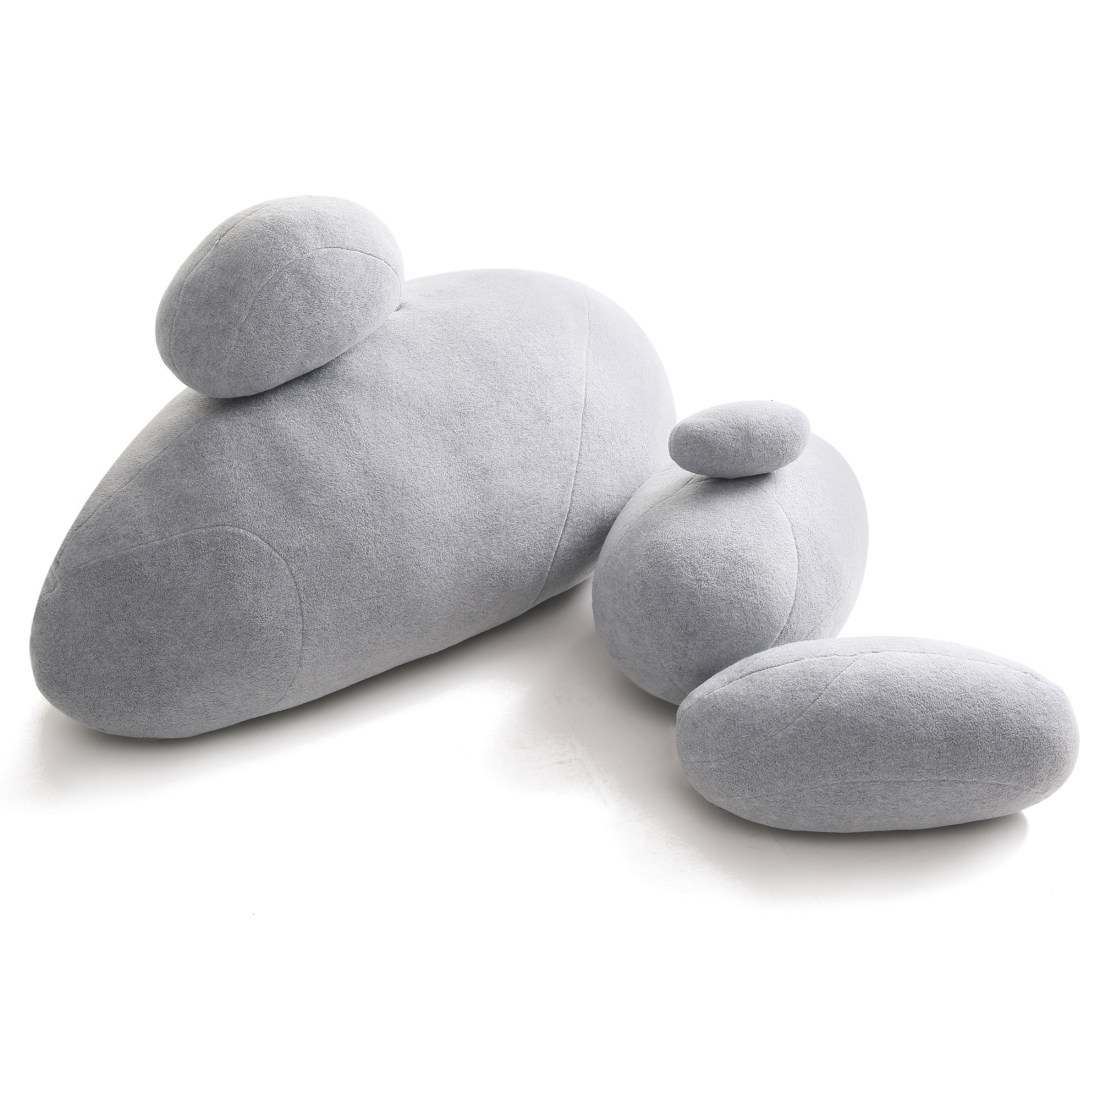  Sheicon Three-Dimensional Curve Realistic Stones Floor Pillows  Creative Home Decoration Stuffed Throw Pillows Big Rock Pillows Pebble  Pillows Color B6 : Home & Kitchen